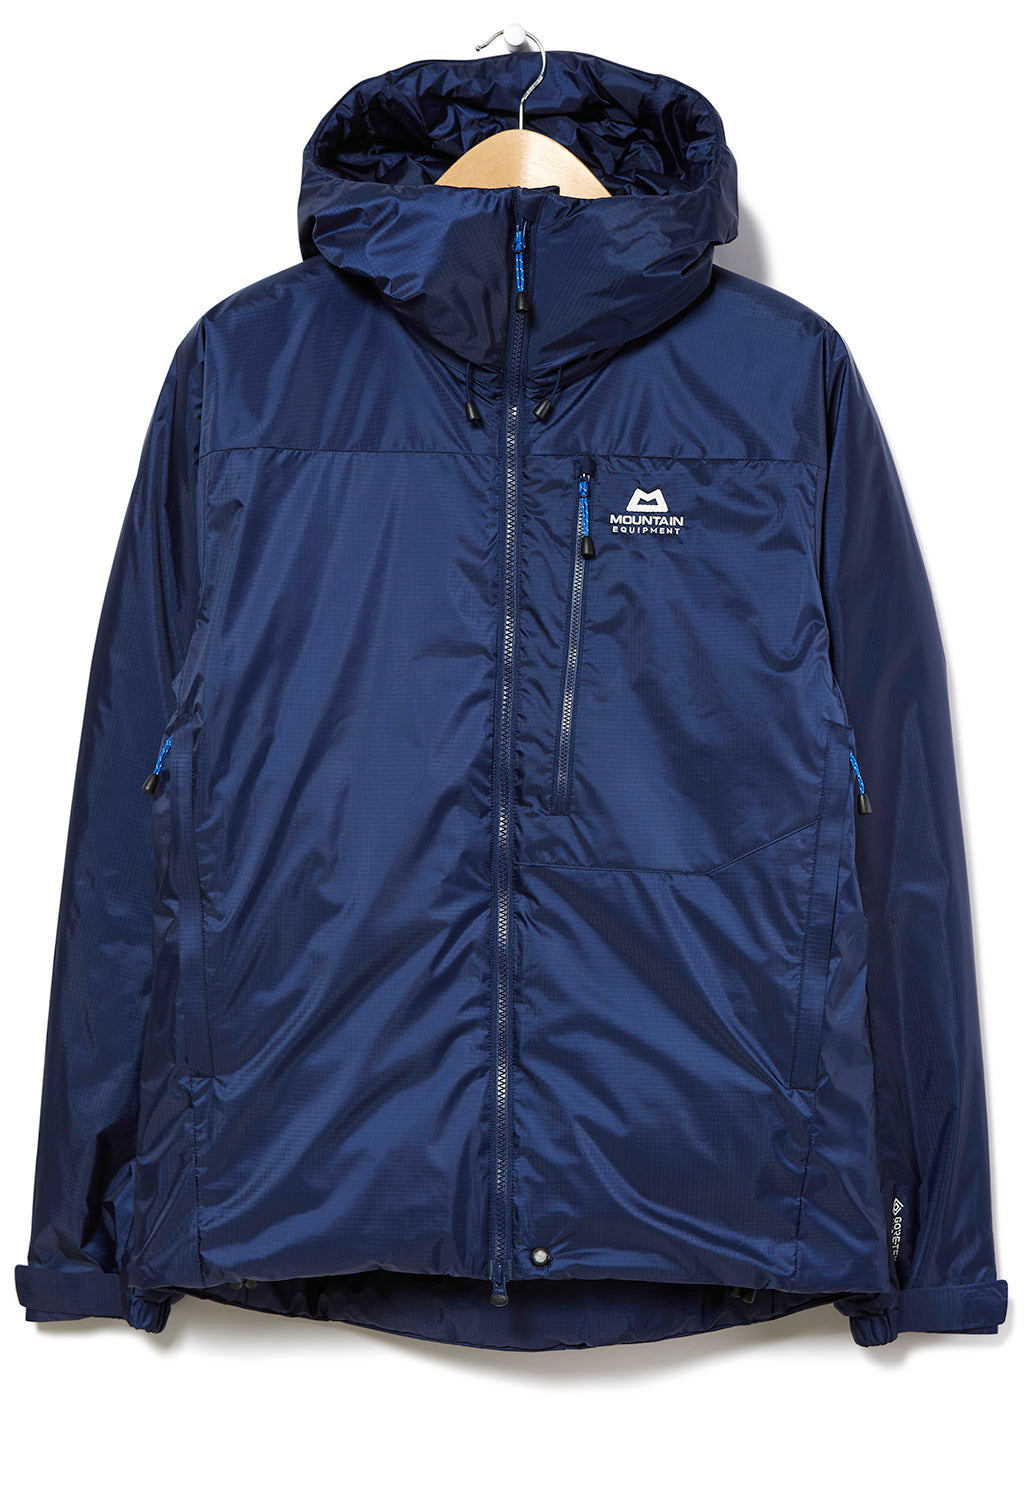 Mountain Equipment Fitzroy Men's Jacket - Medieval Blue – Outsiders ...